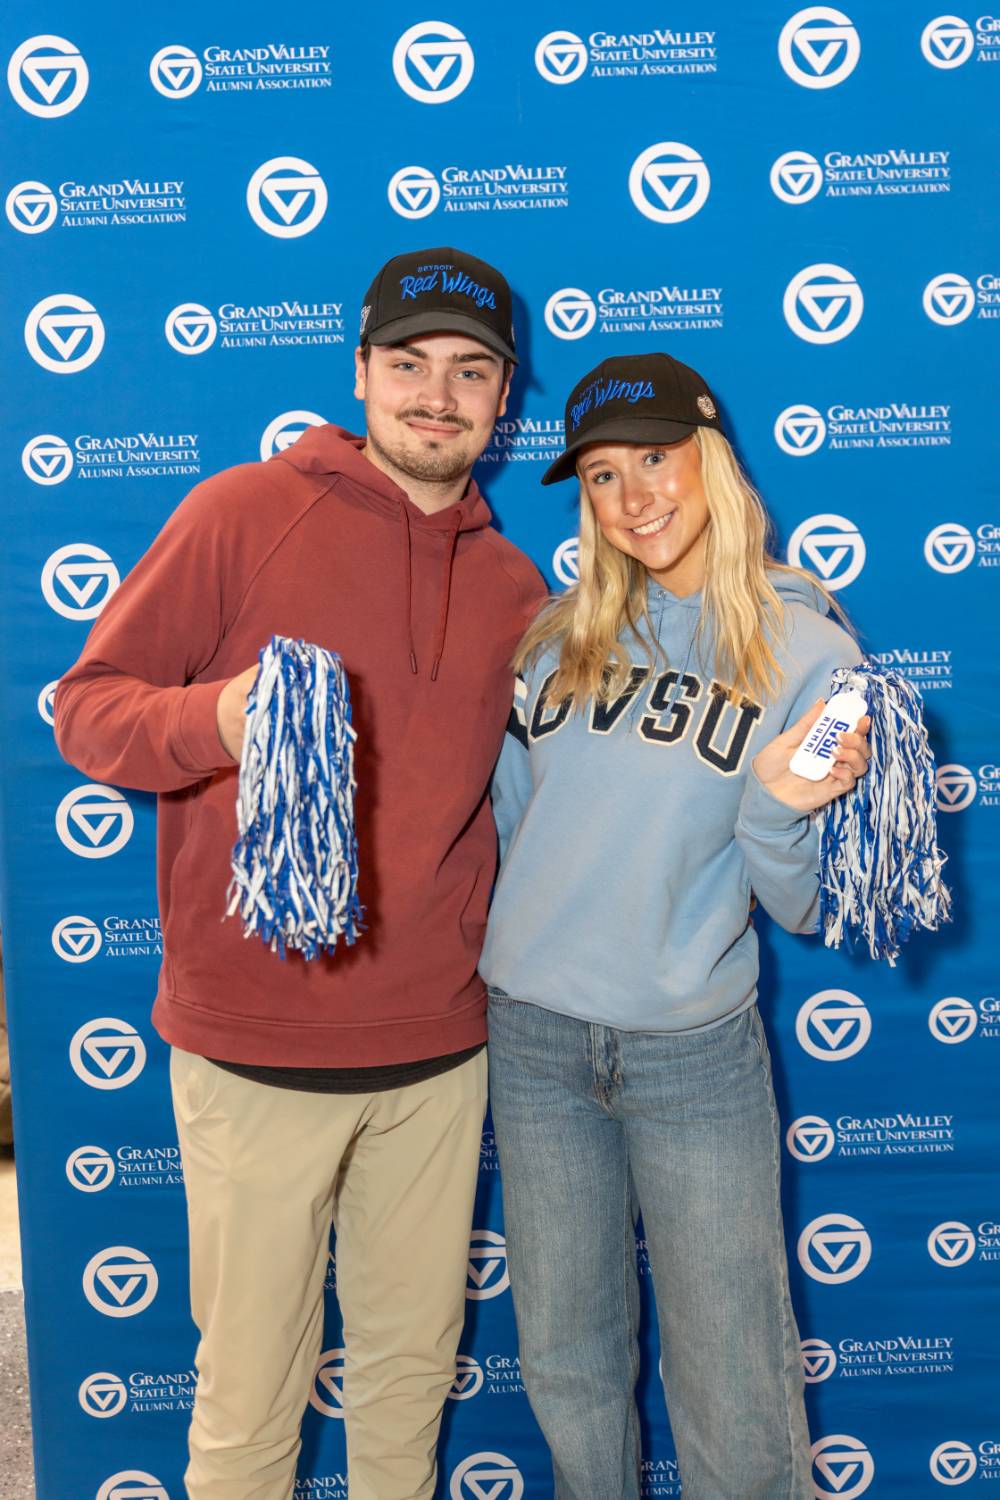 Two alums holding pom poms by the Alumni Relations backdrop